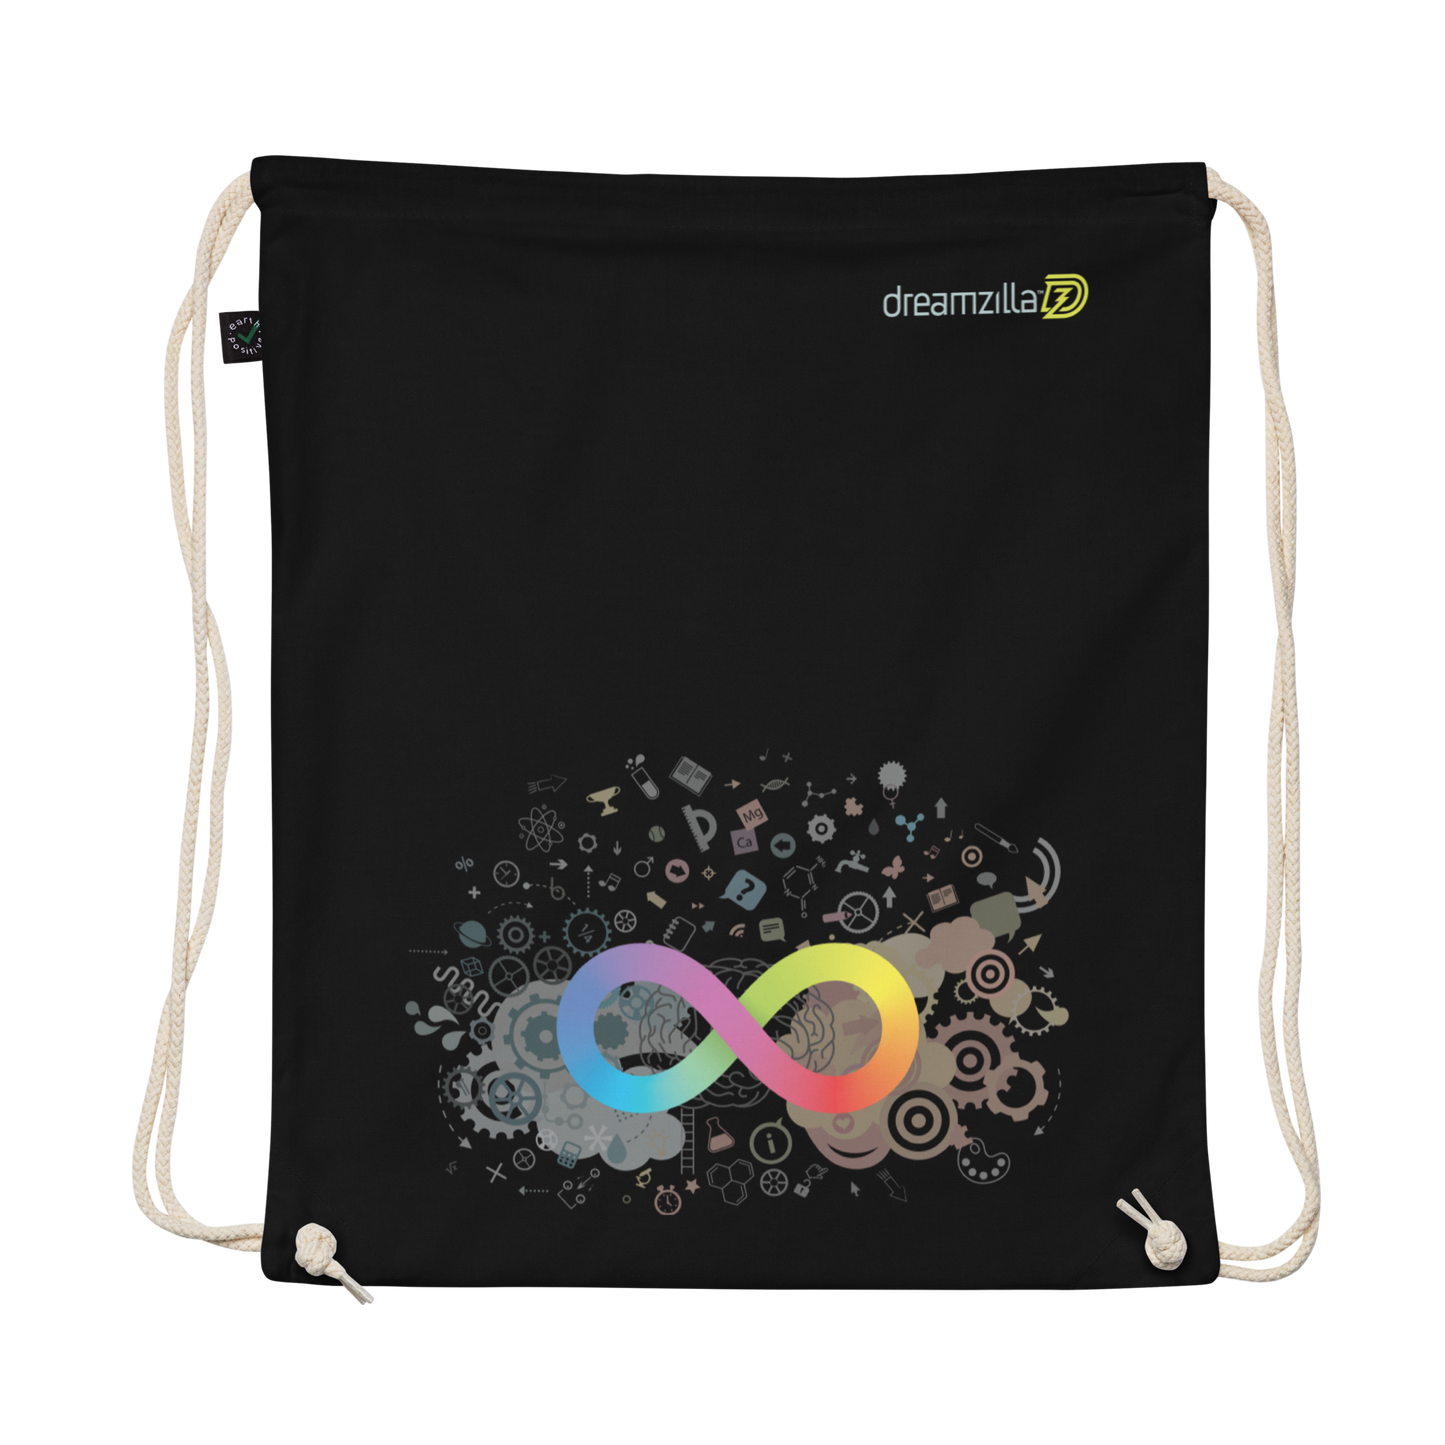 Flat view of Neurodiversity Rainbow Infinity EarthPositive Cotton Drawstring Bag in Black